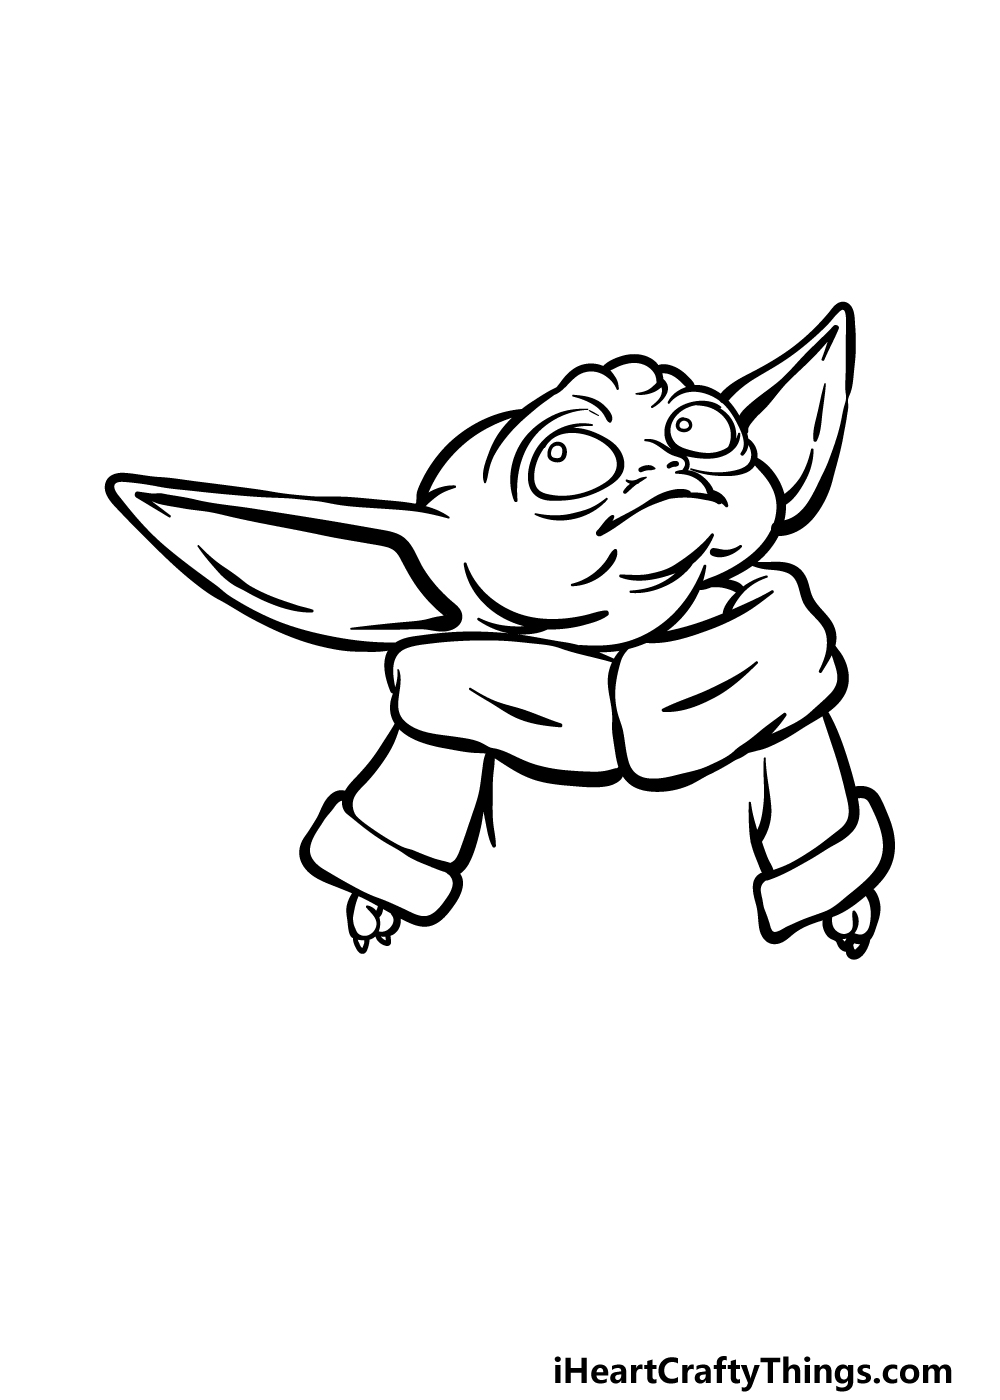 Baby Yoda In Black And White Drawing - How To Draw Baby Yoda In Black And  White Step By Step